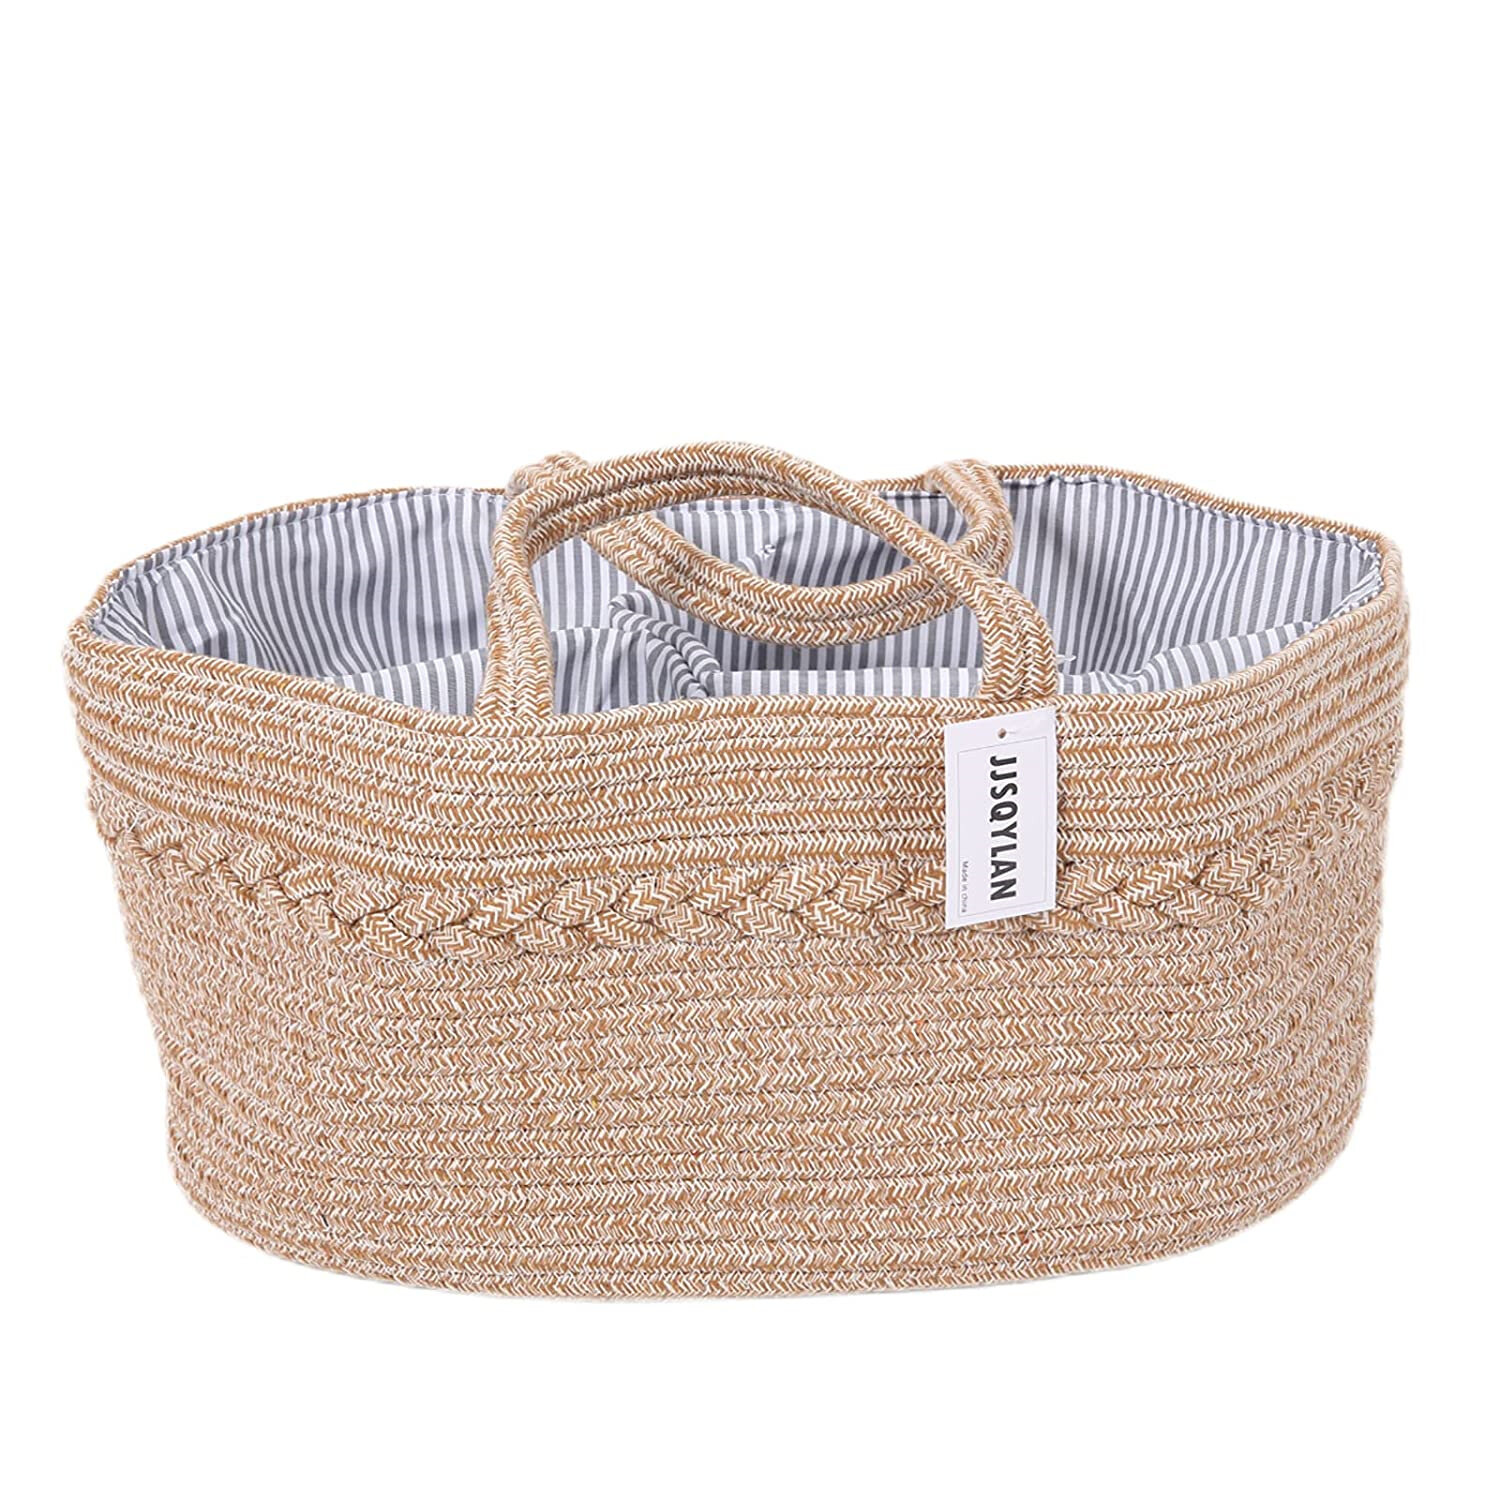 Baby Diaper Caddy Organizer 100% Cotton Rope Nursery Diaper Storage Basket Diaper Storage Bin for Diaper Wipes Toys Baby Essentials Brown 